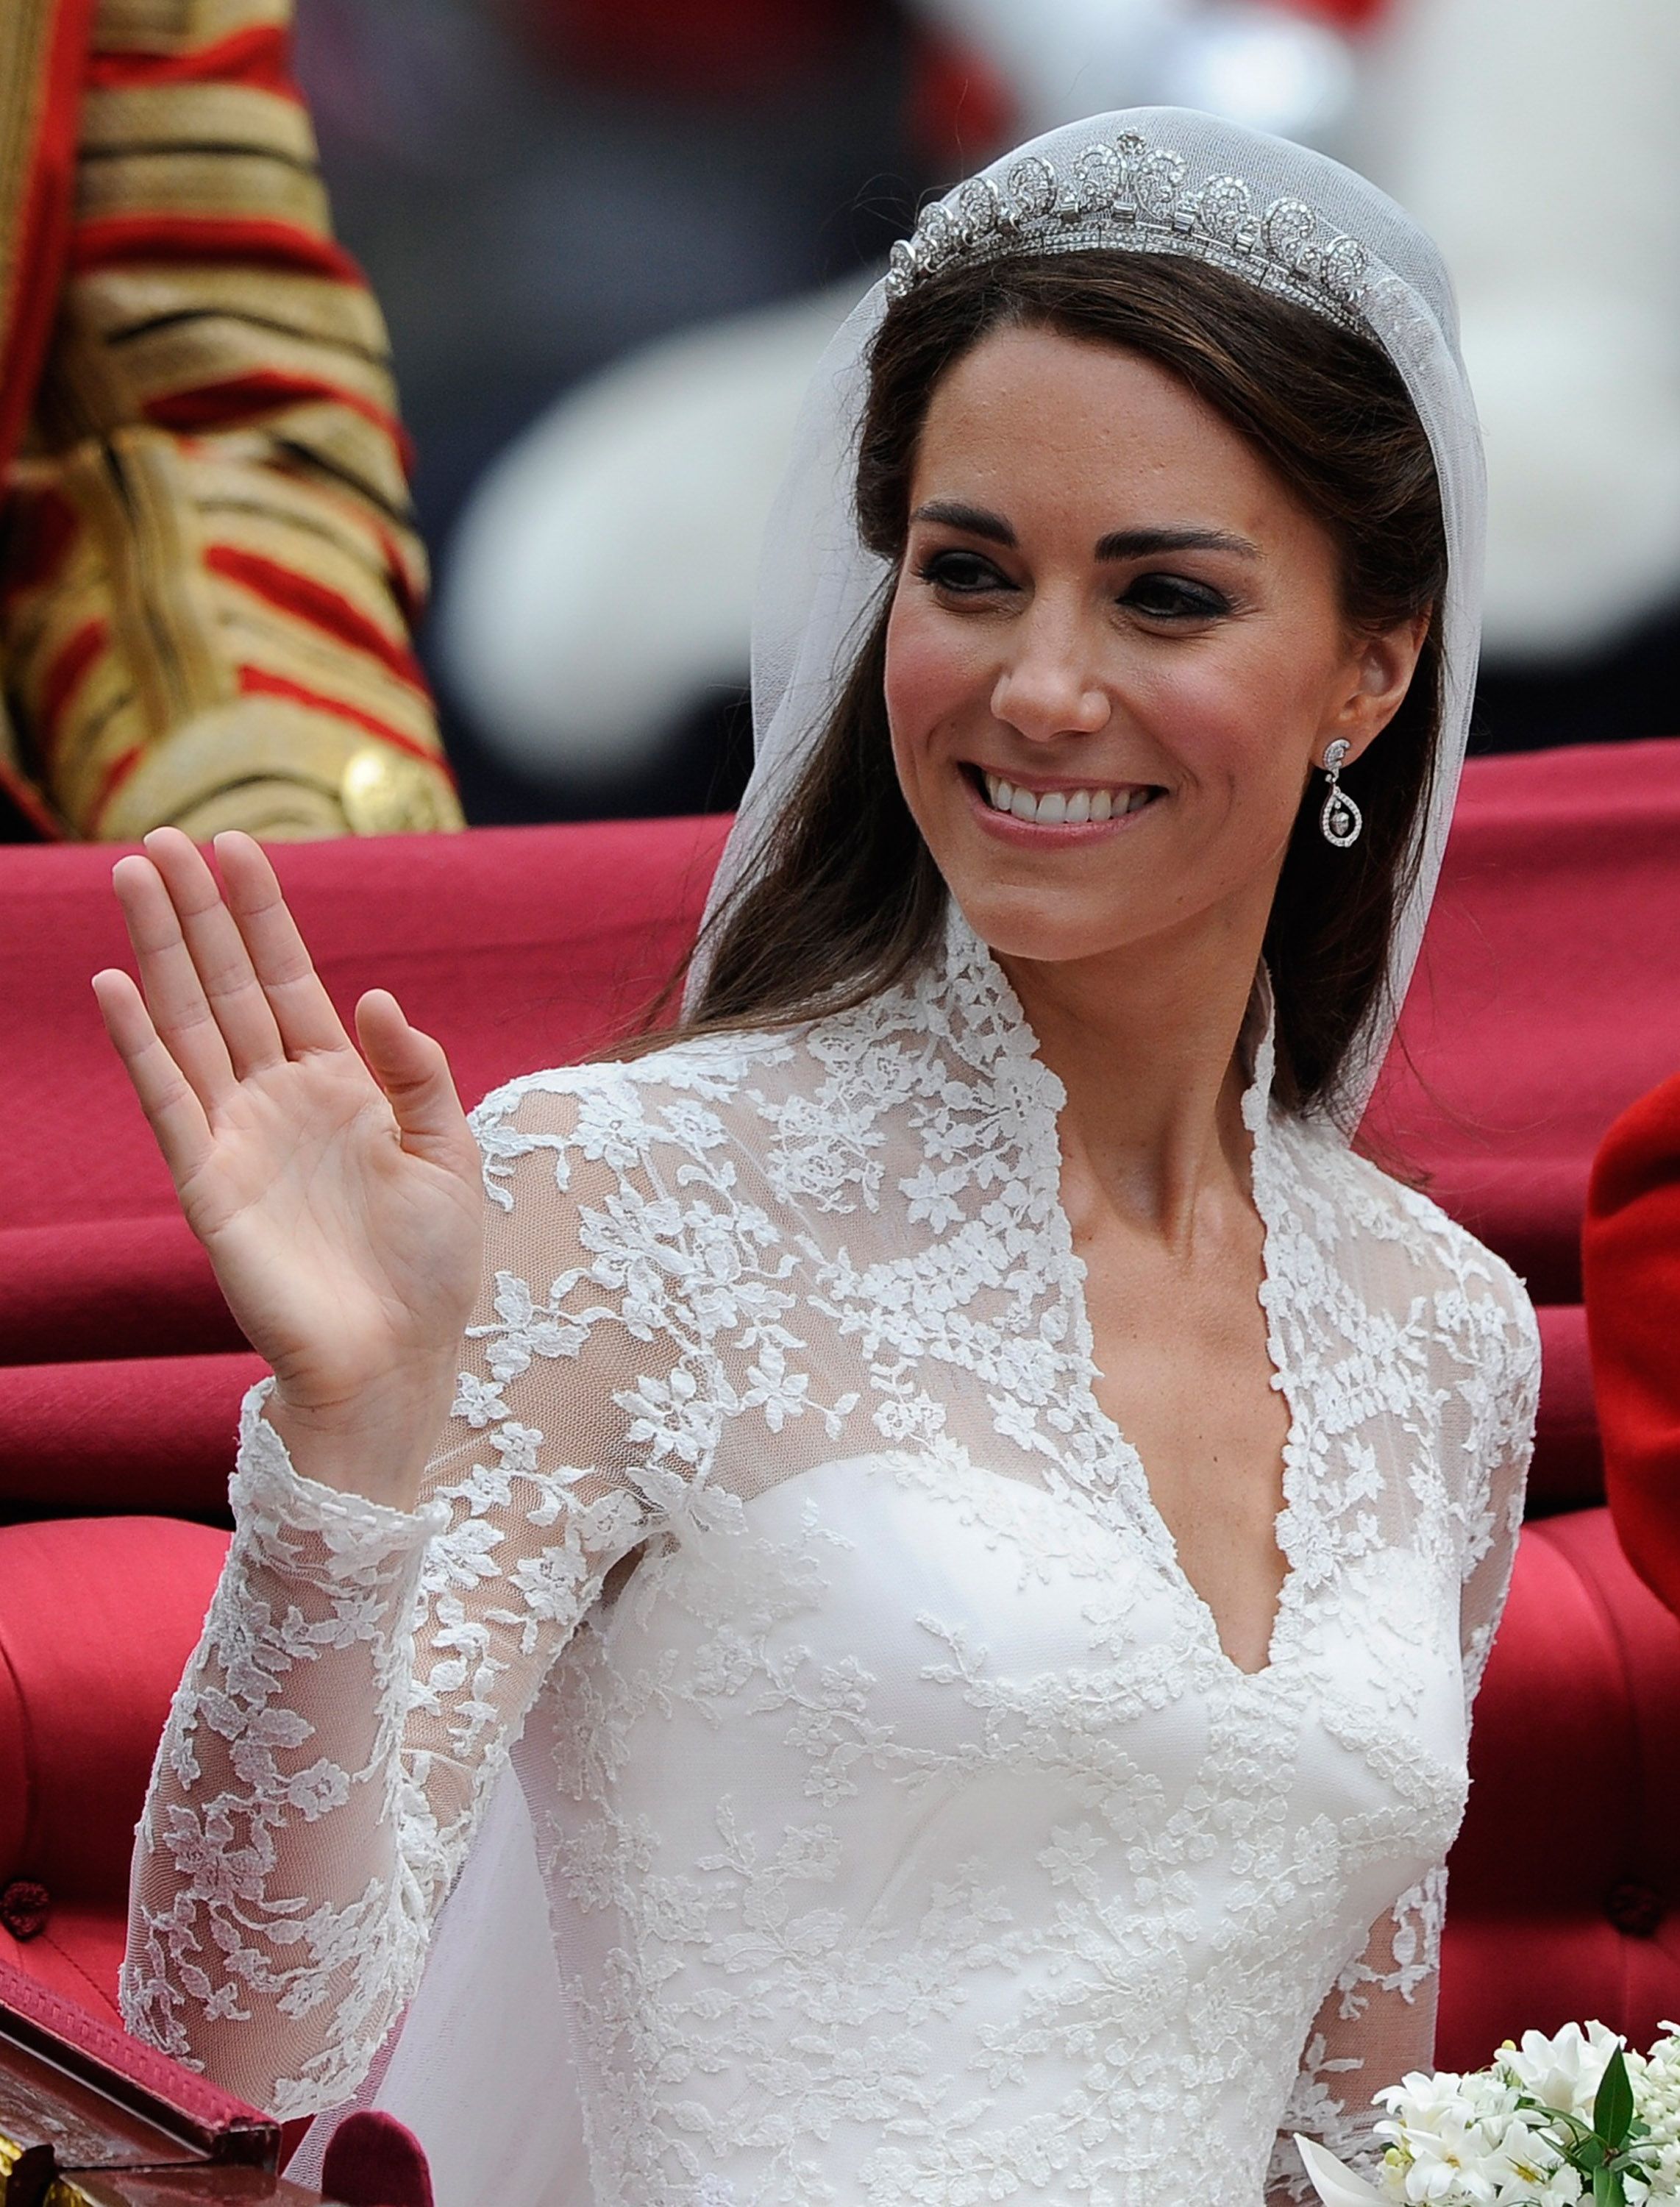 Kate Middleton Ignored Royal Hair Request On Wedding Day Kate Middleton Broke Royal Hair Rule On Wedding Day